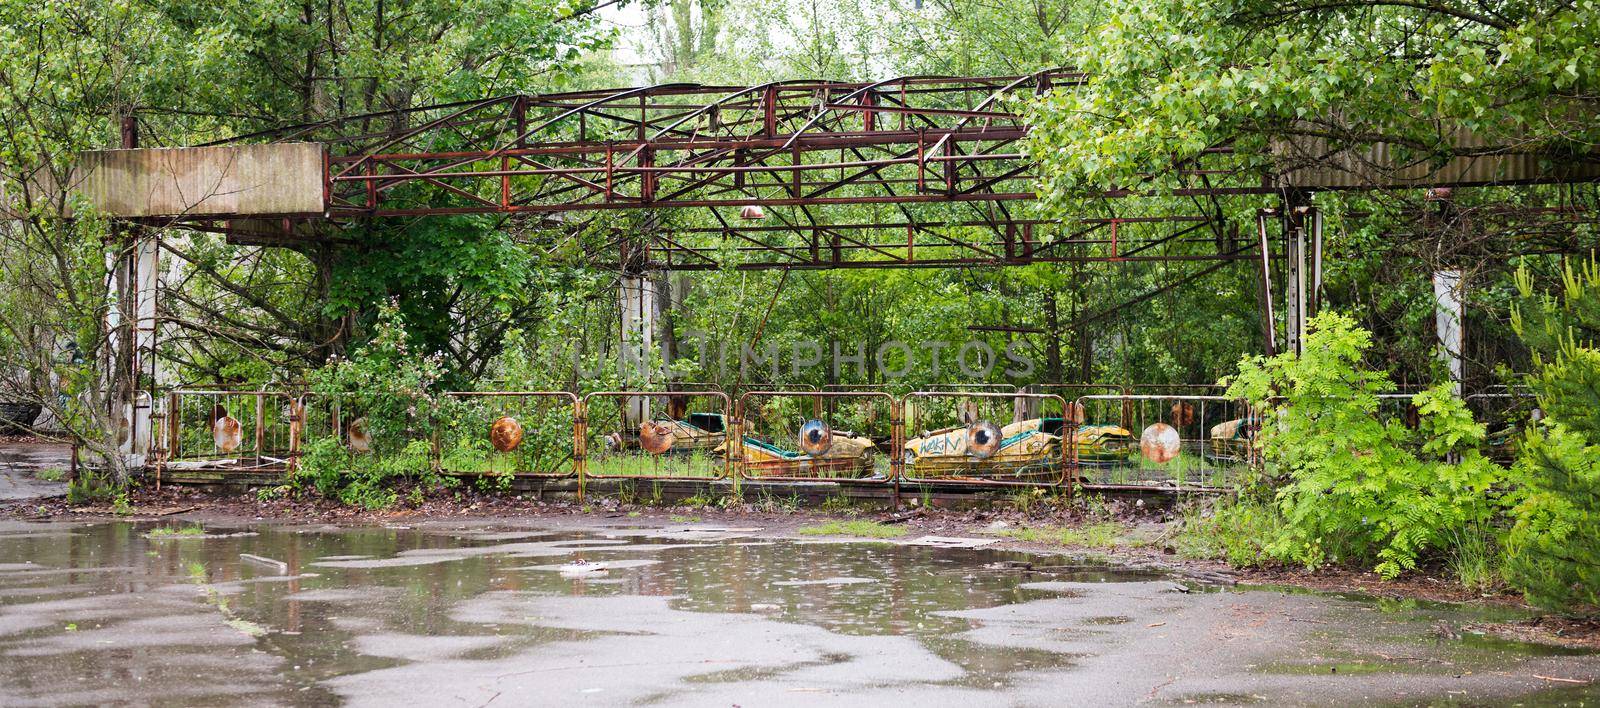 abandoned amusement park with cars in Pripyat